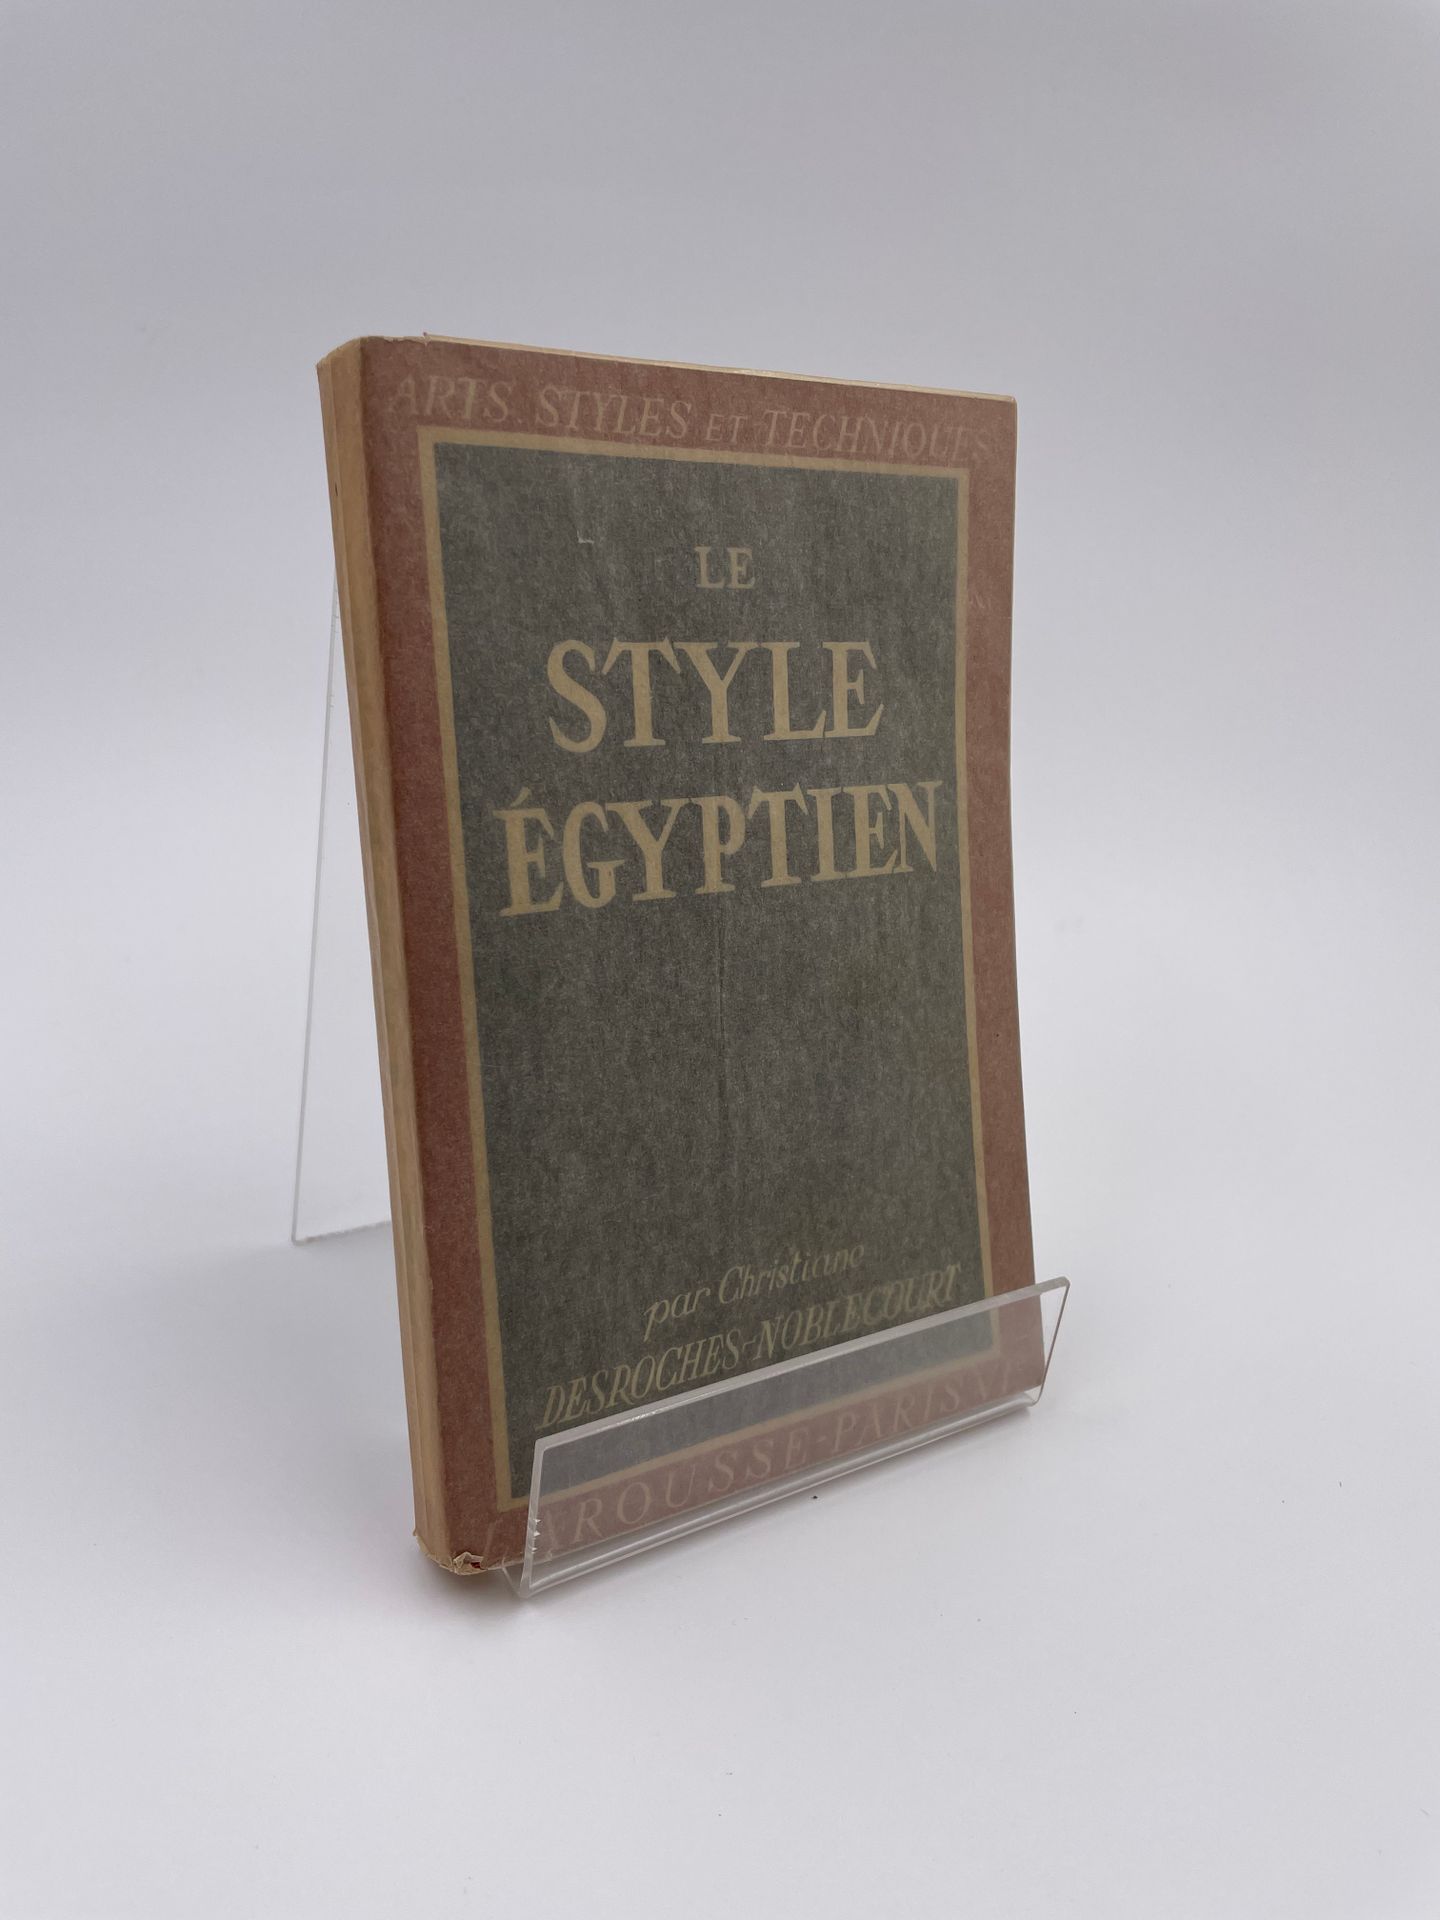 Null 1 Band: "Le Style Égyptien", Christiane Desroches Noblecourt, Collection 'A&hellip;